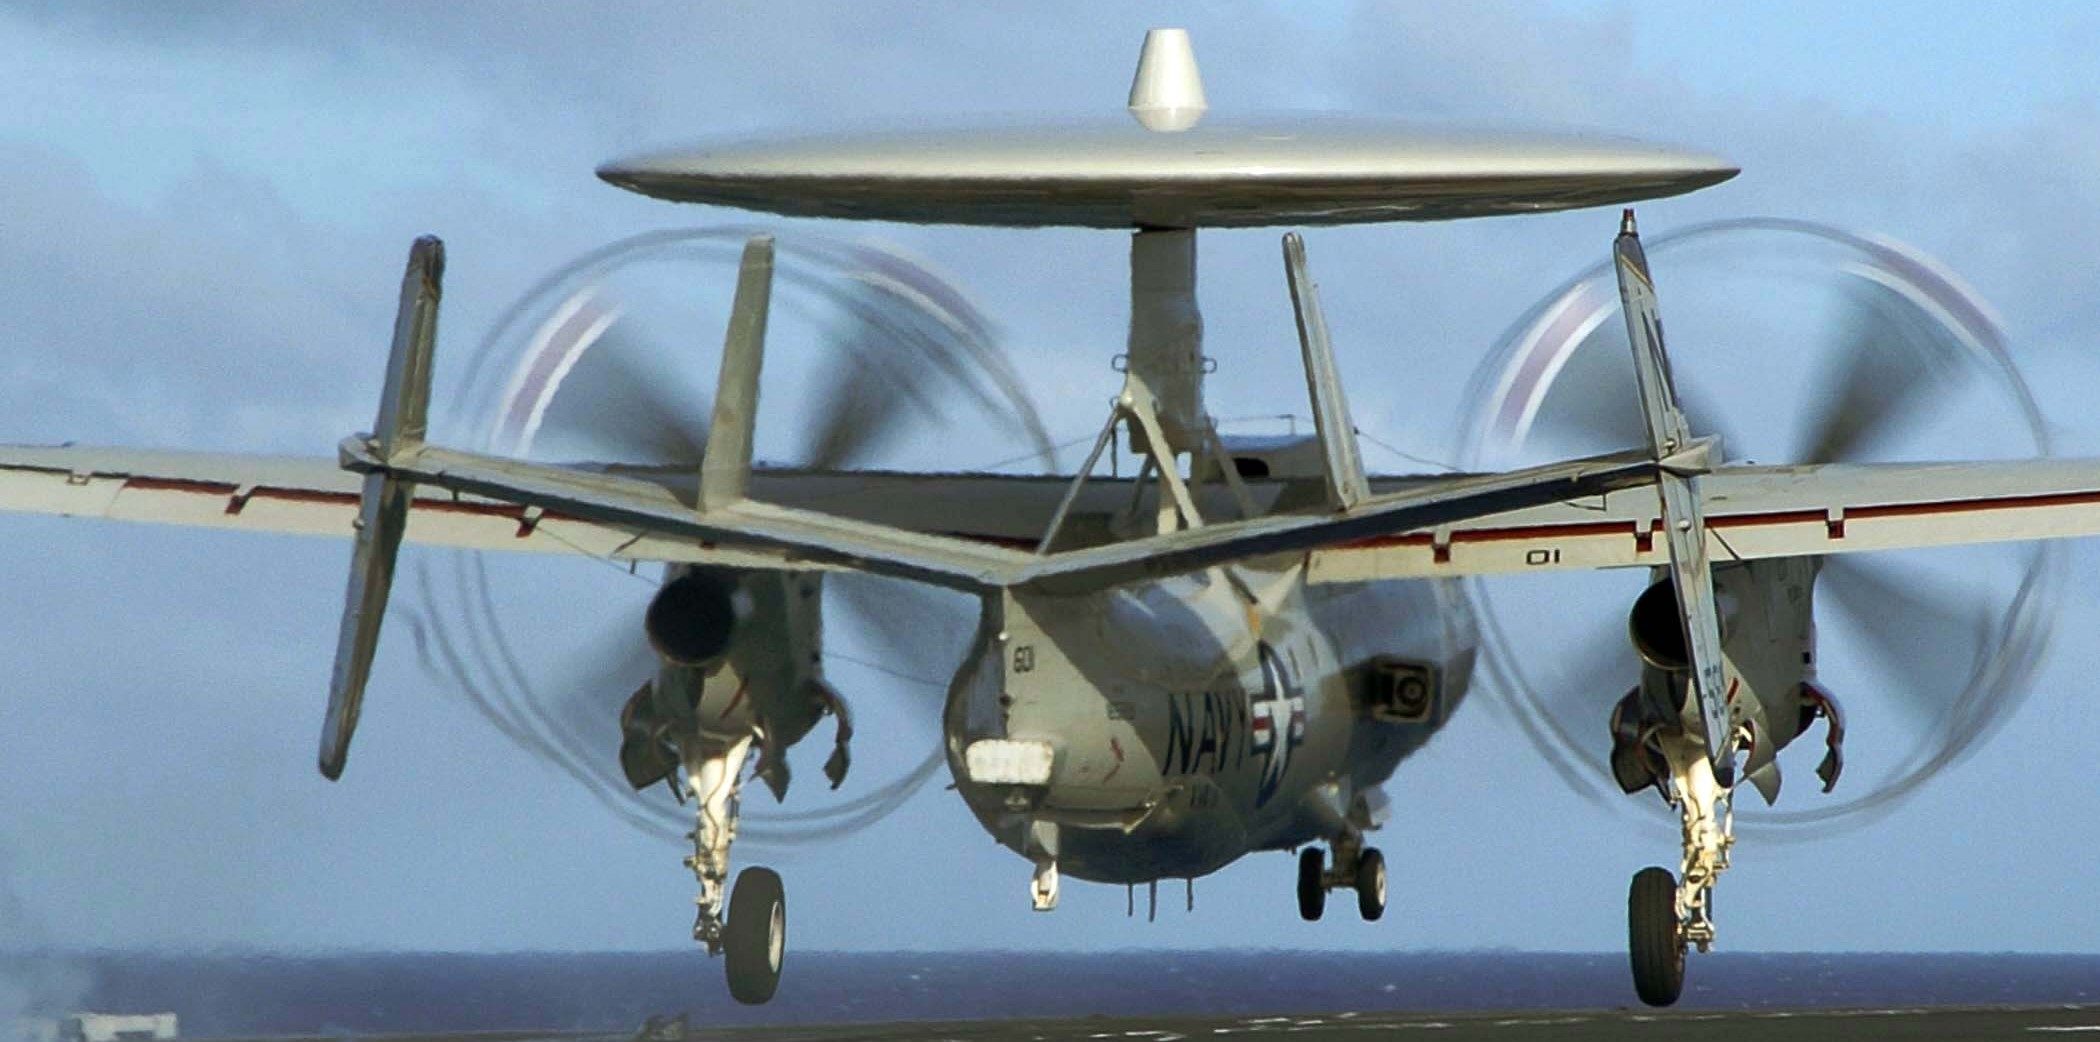 vaw-116 sun kings airborne command control squadron carrier early warning cvw-2 uss abraham lincoln cvn-72 08